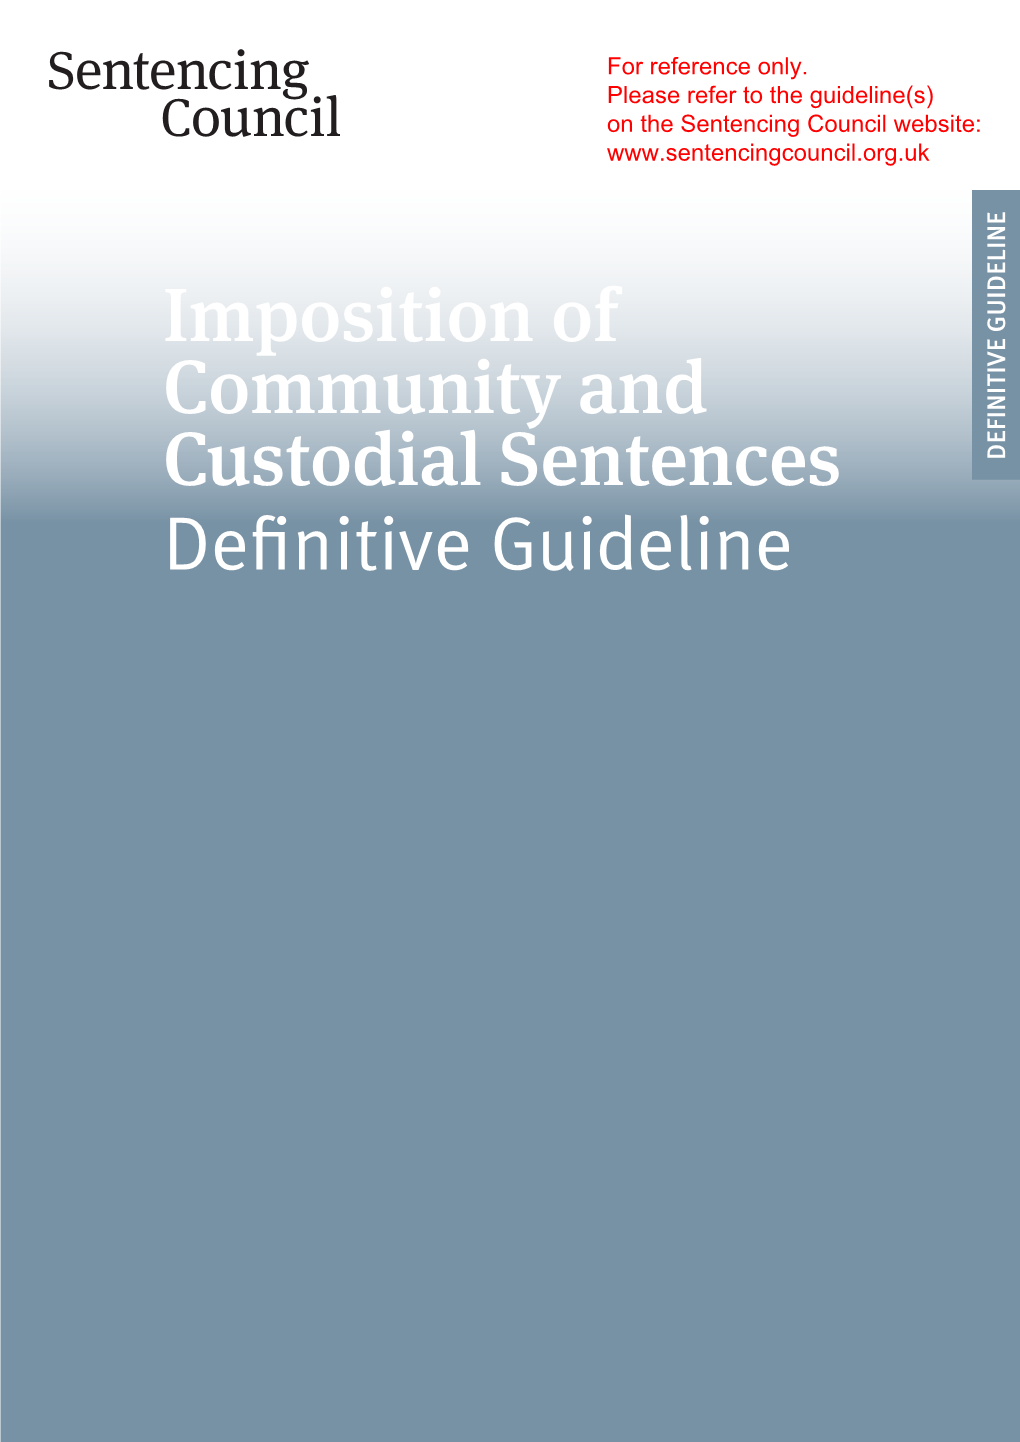 Imposition of Community and Custodial Sentences Definitive Guidelinefor Reference Only